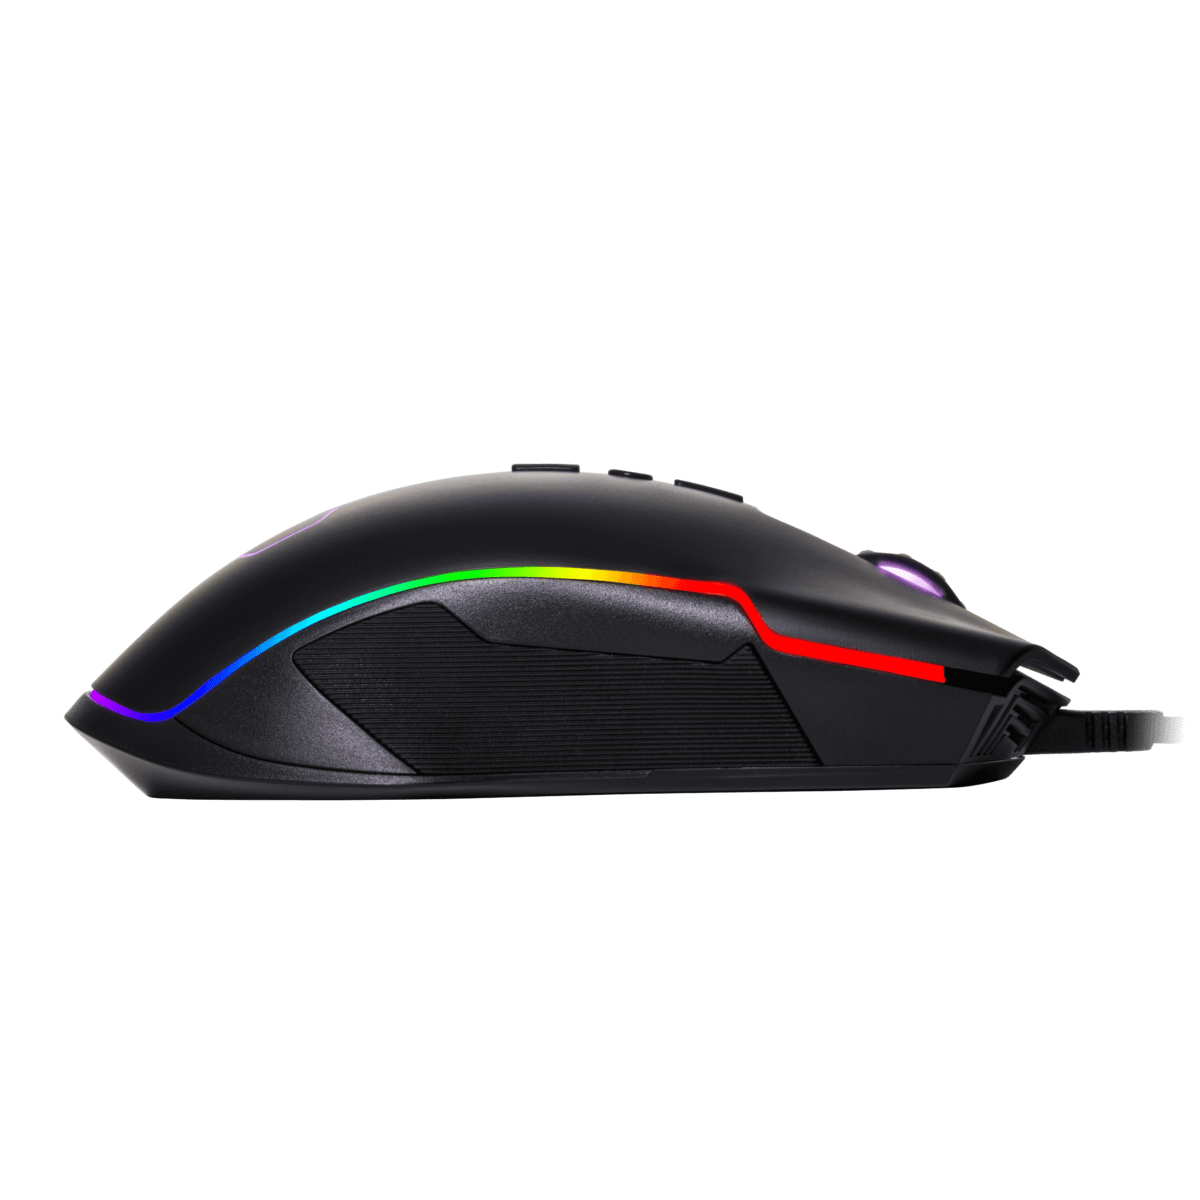 Cooler Master CM310 Gaming mouse